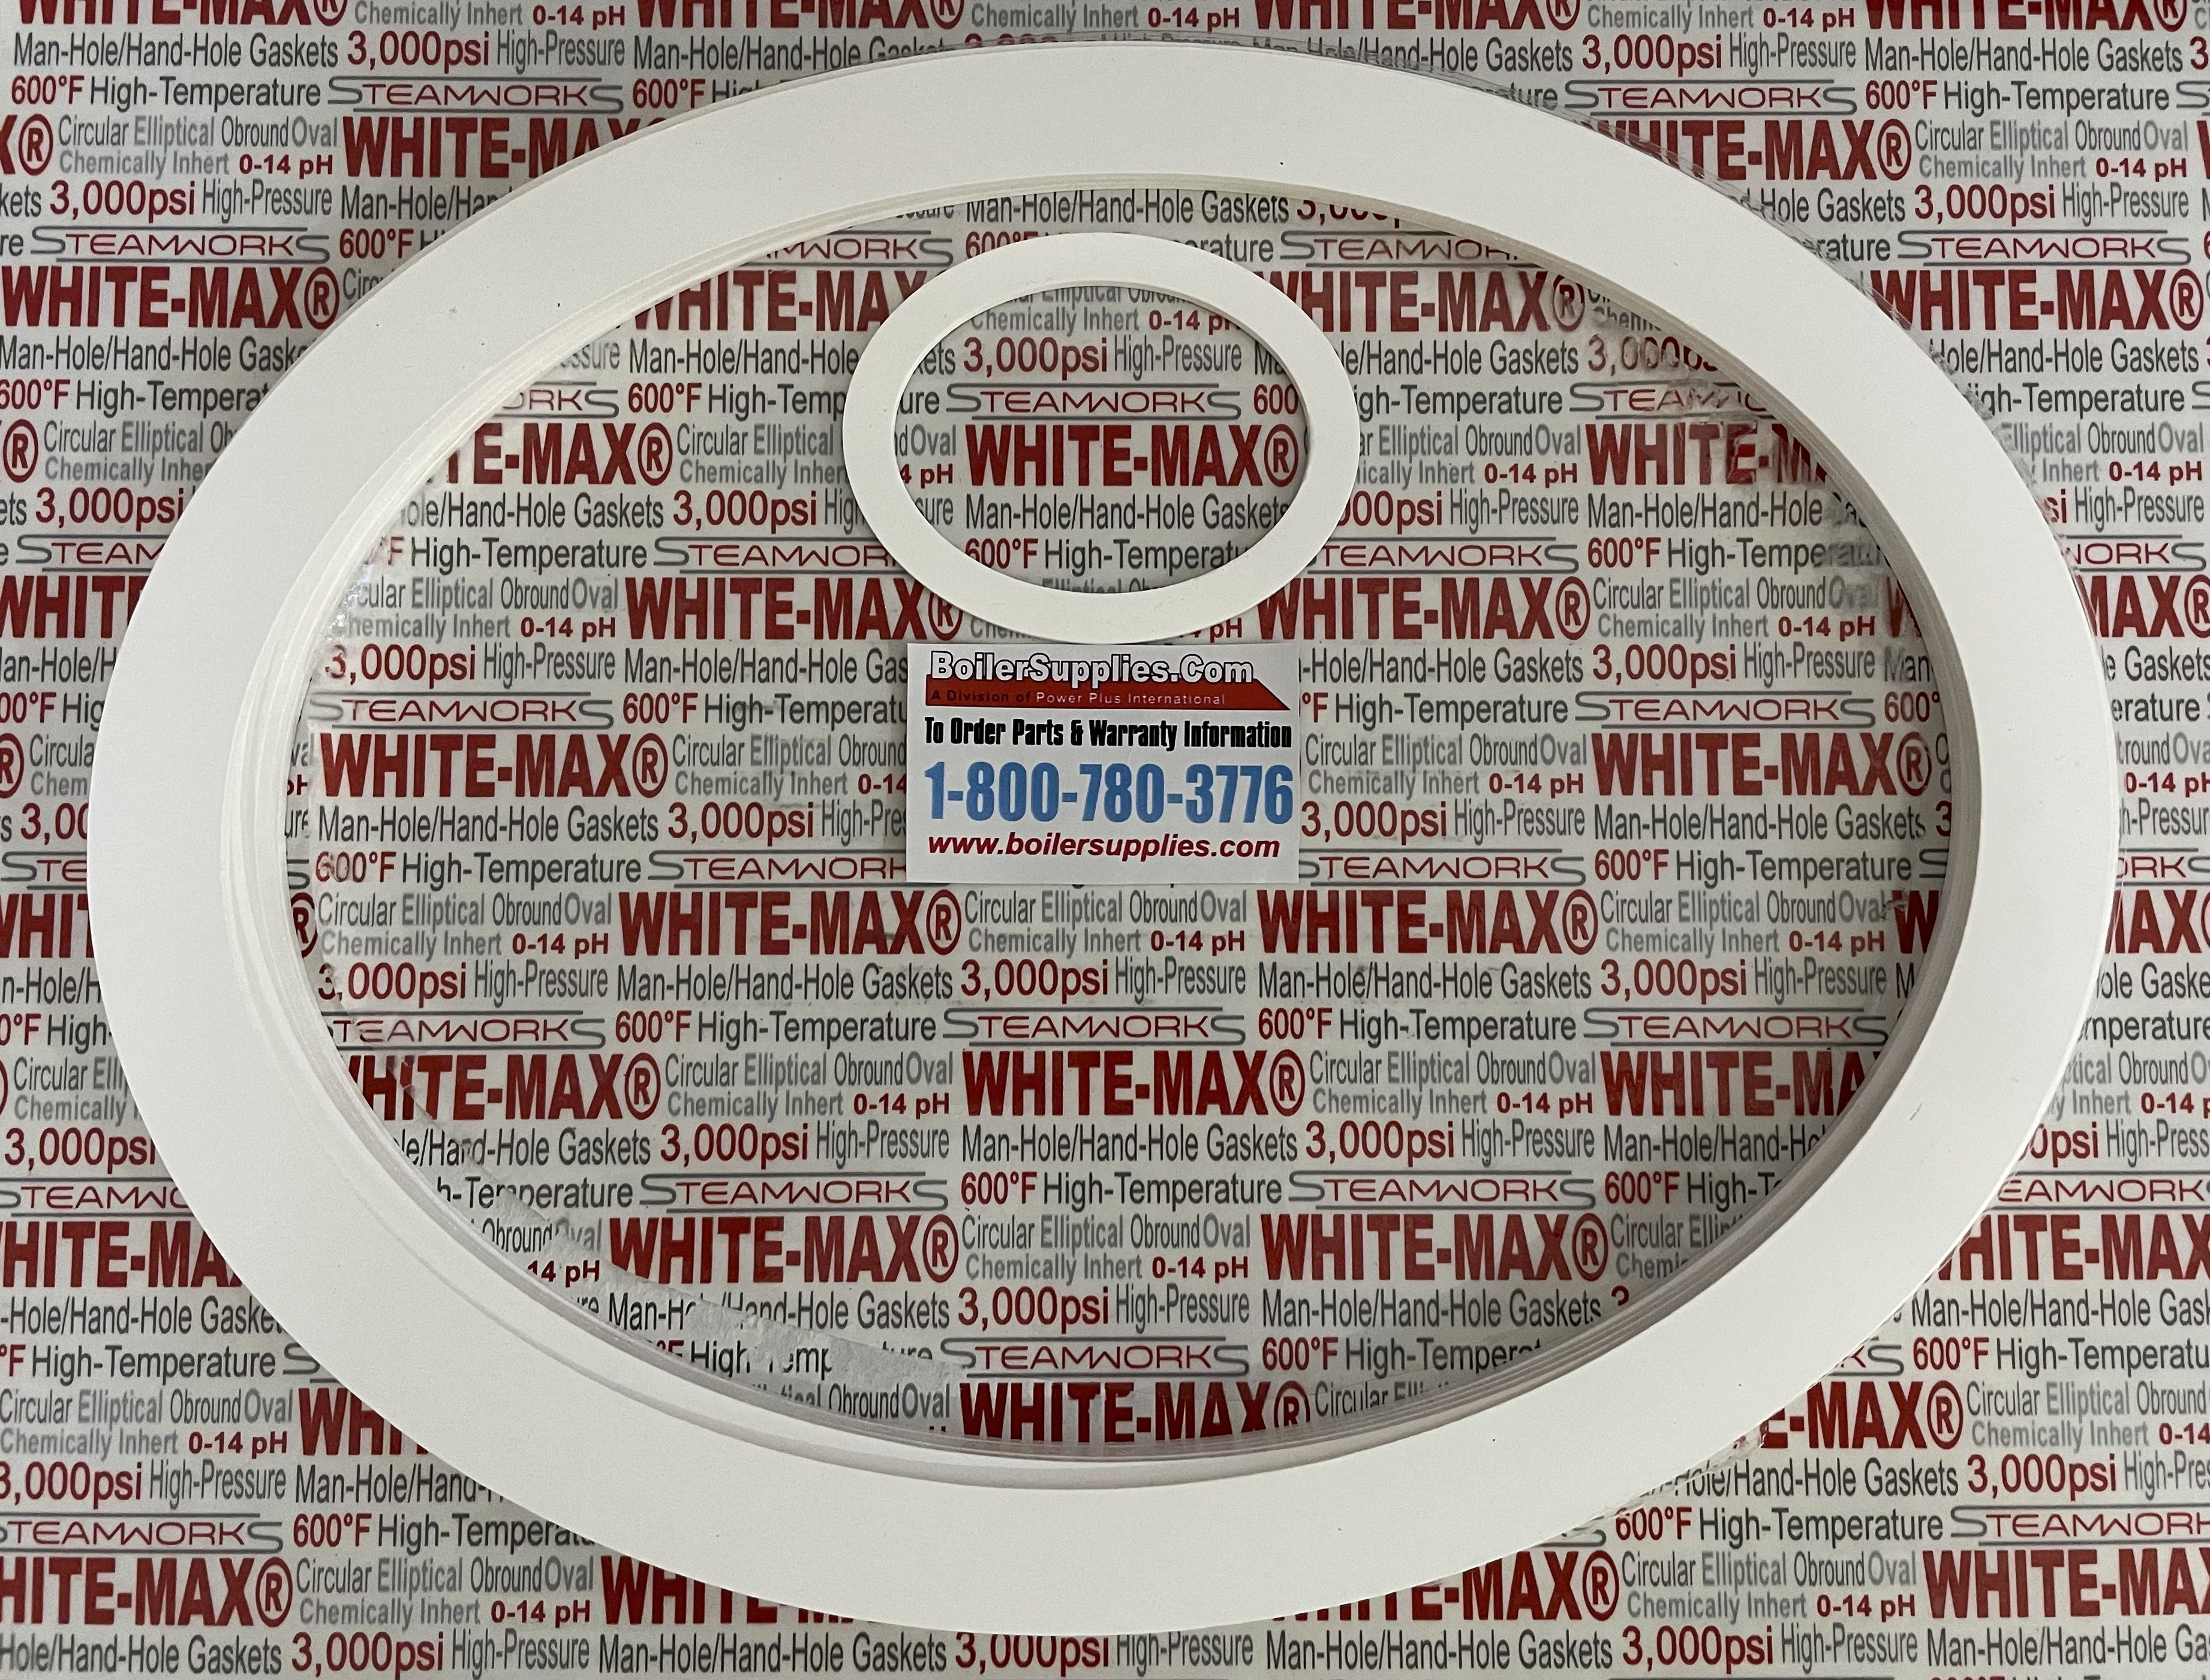 White Max "Obround" Boiler Gaskets (Pure PTFE, FDA Compliant Gasket)